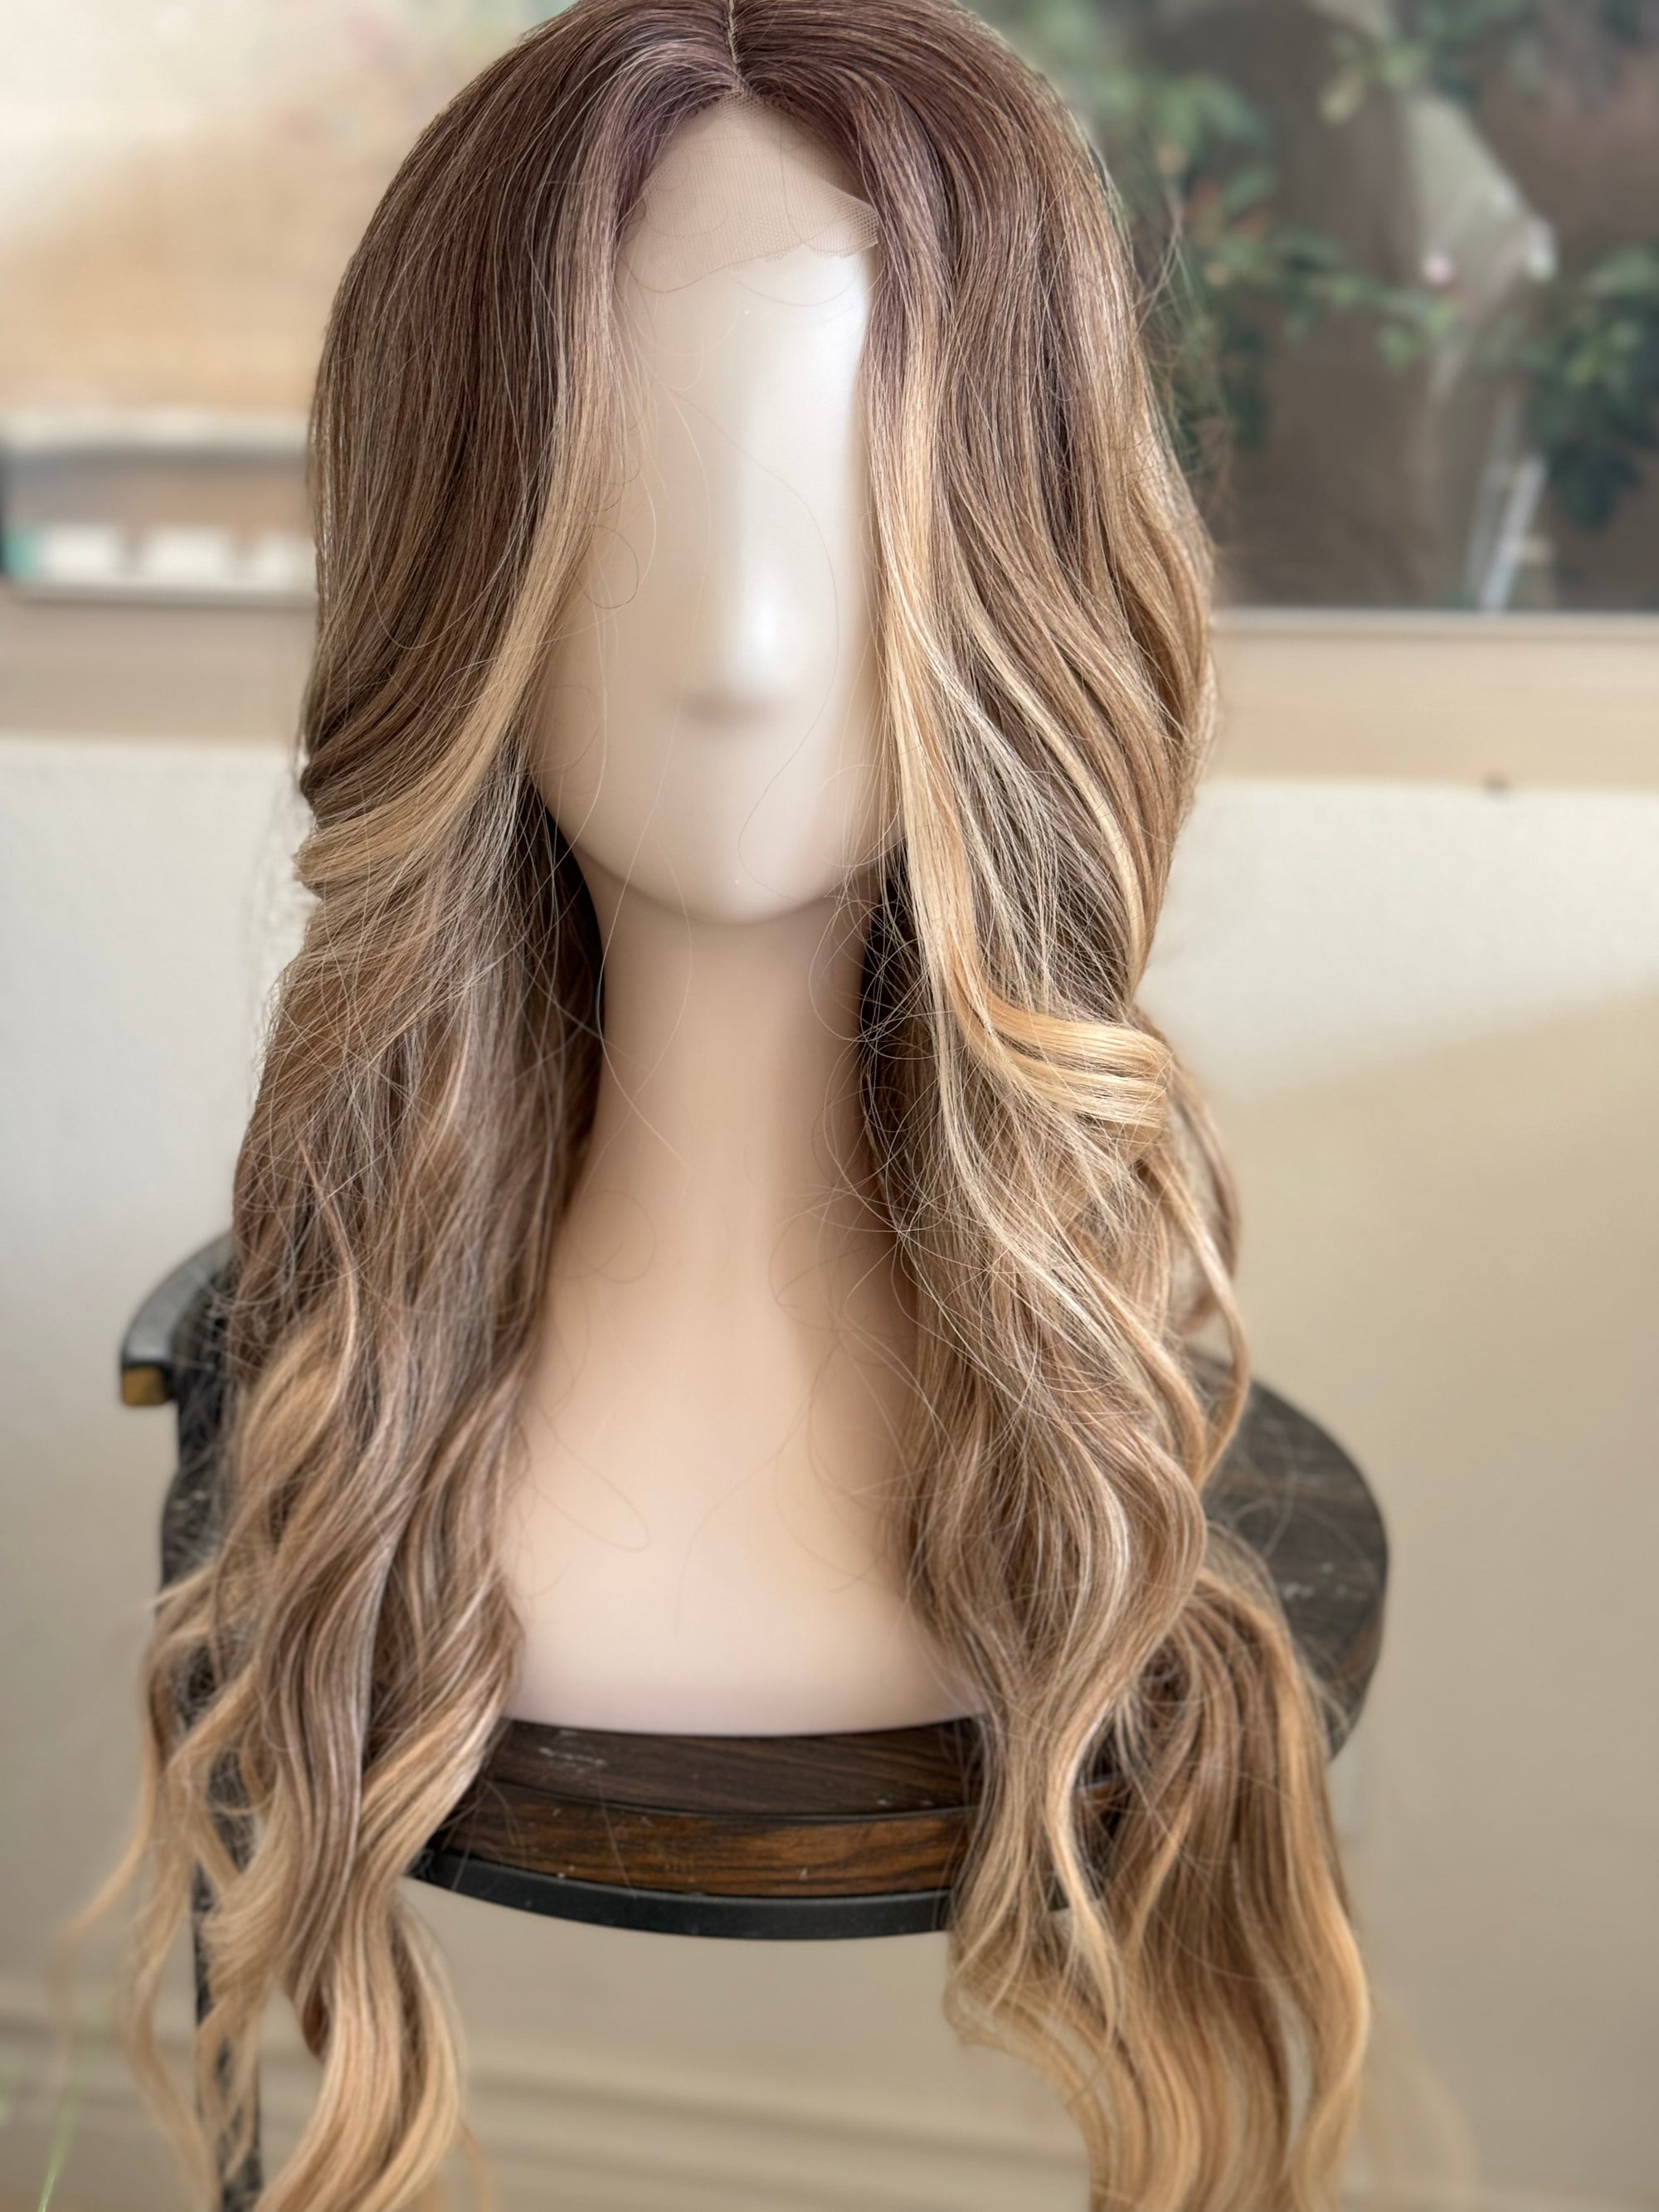 Tillstyle long ombre blonde wavy wig for women 26 inch middle part curly wavy wig